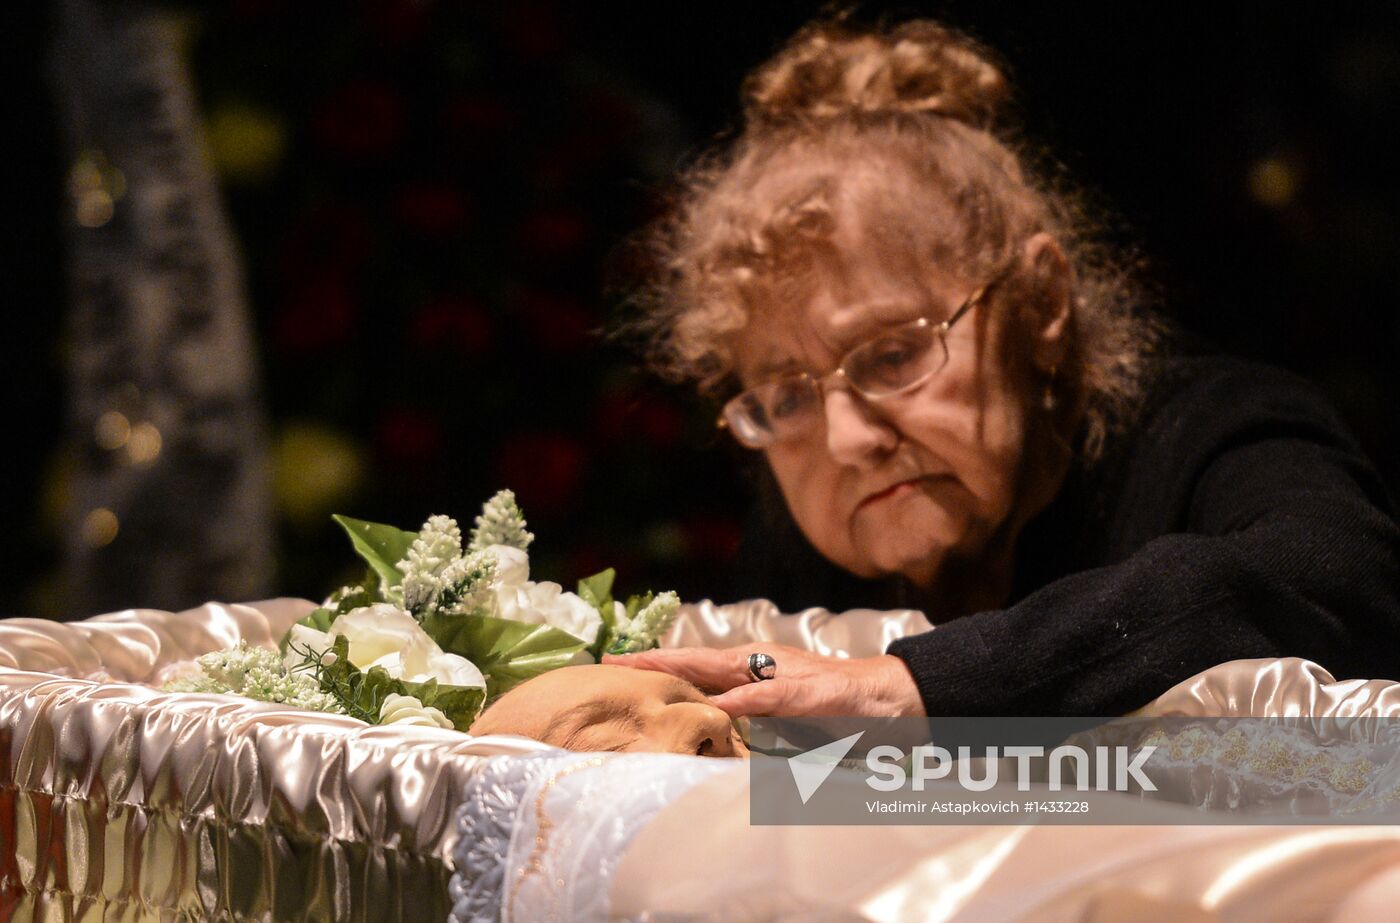 Funeral service for actor Valery Zolotukhin at Taganka Theater